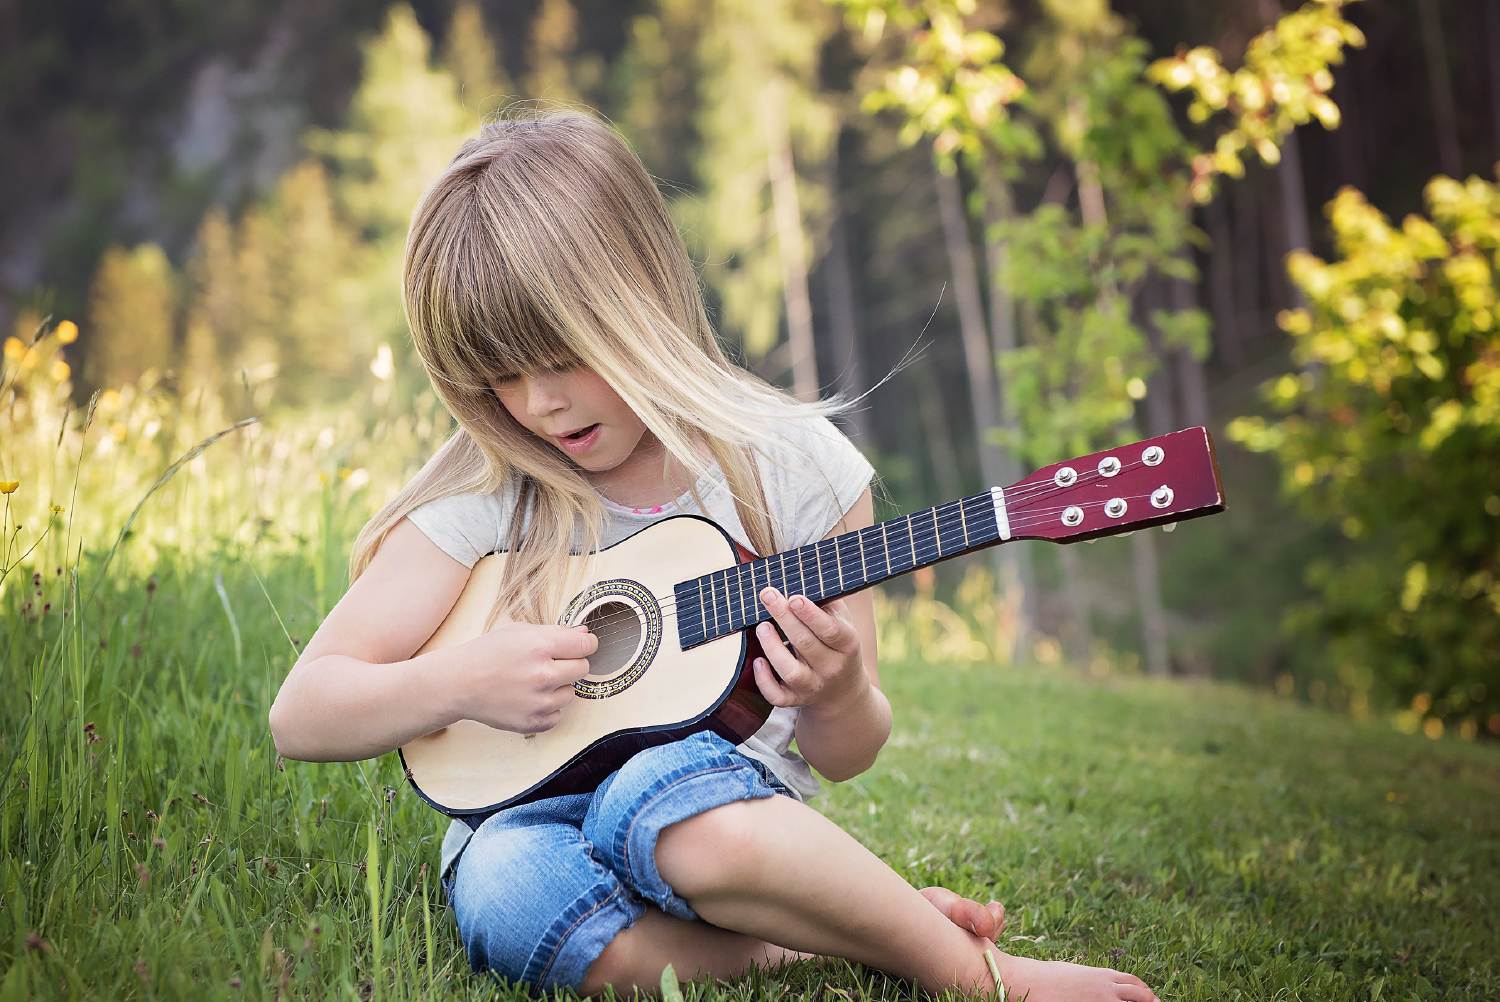 A girl learns auto-didactically to play the guitar.